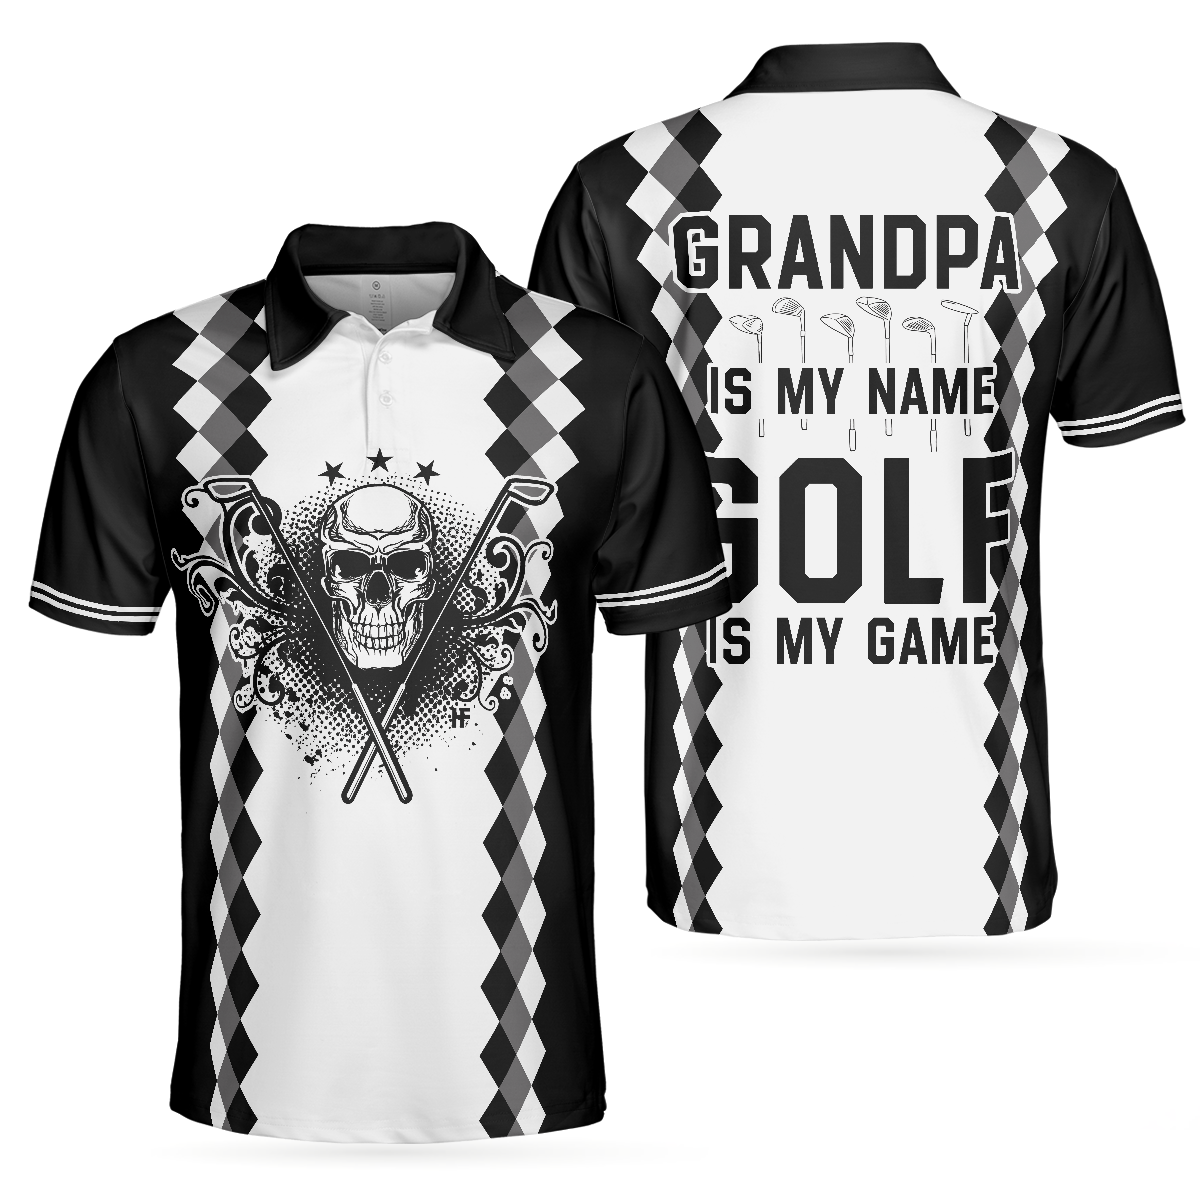 Grandpa Is My Name Golf Is My Game Golf Polo Shirt Black And White Argyle Pattern Golf Shirt For Men - 1